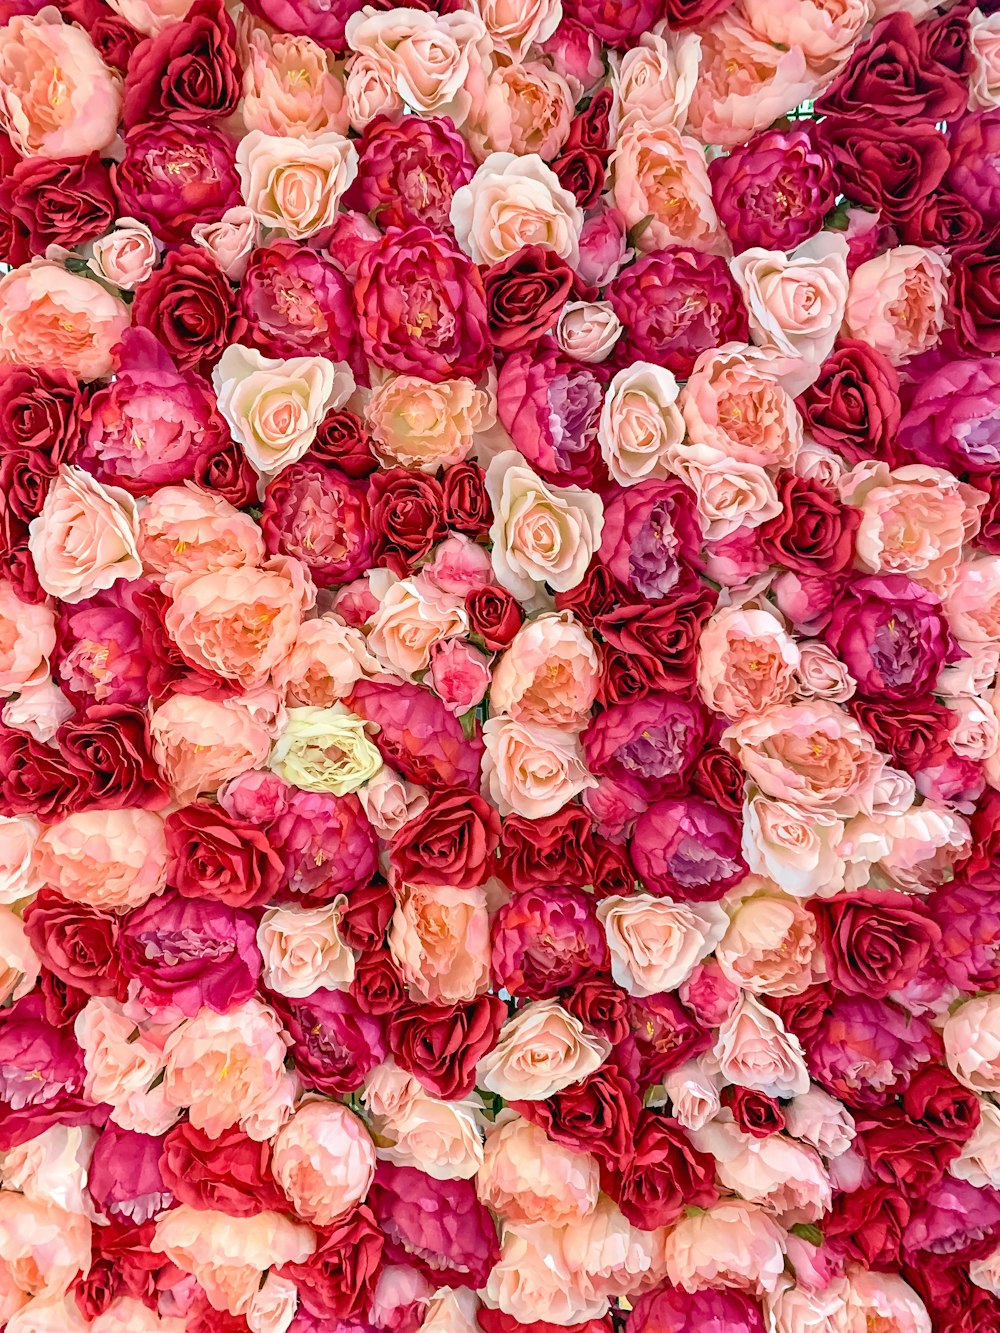 550+ Flower Wall Pictures | Download Free Images on Unsplash